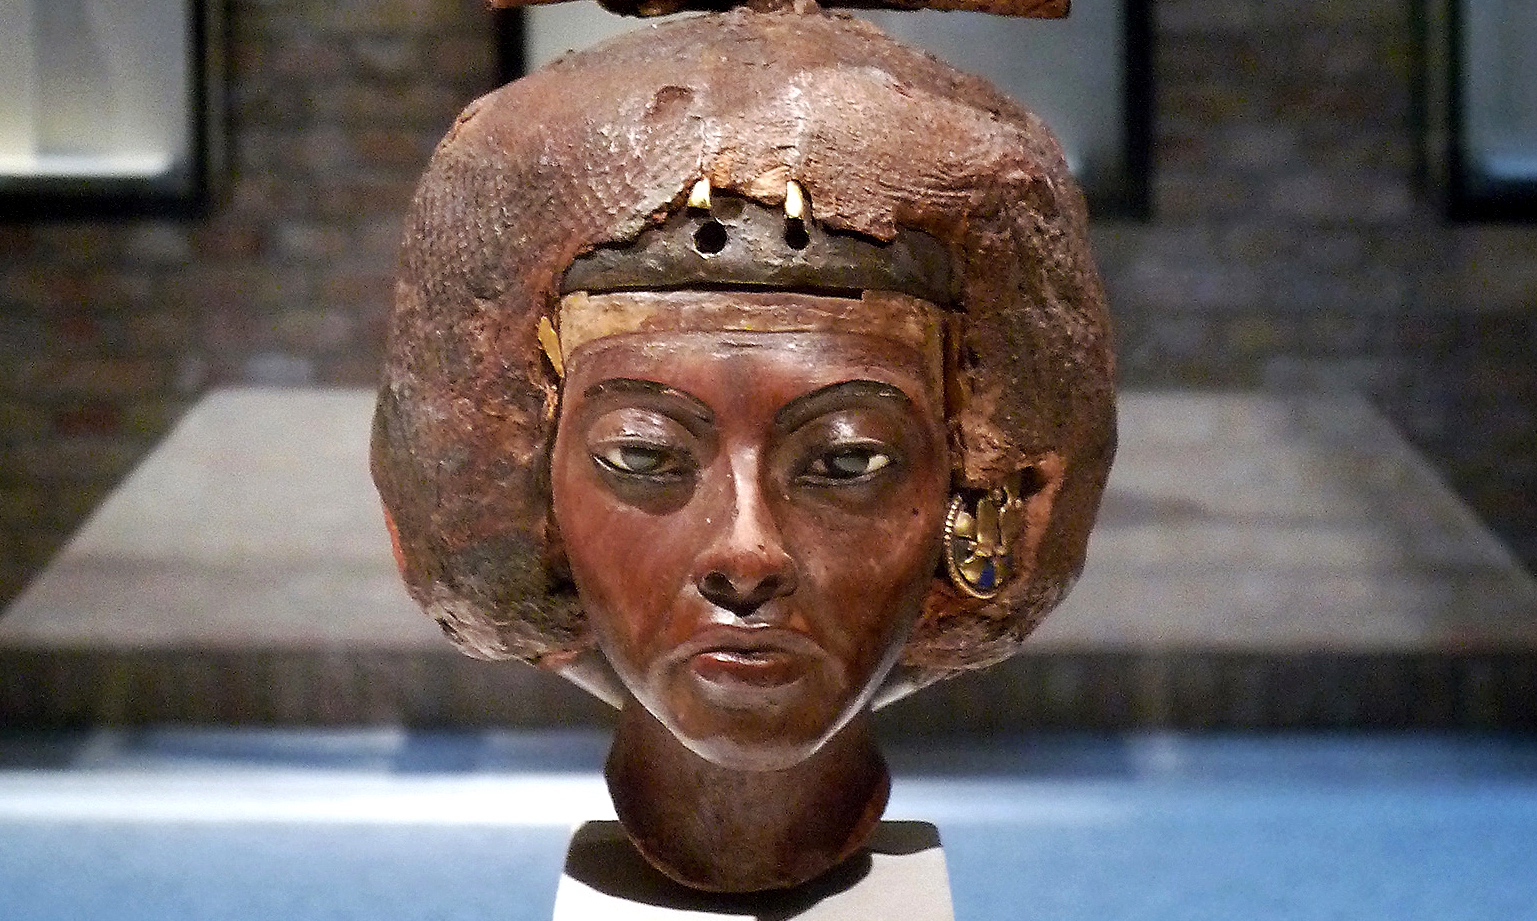 Portrait Head of Queen Tiye with a Crown of Two Feathers, c. 1355 B.C.E., Amarna Period, Dynasty 18, New Kingdom, Egypt, yew wood, lapis lazuli, silver, gold, faience, 22.5 cm high (Egyptian Museum and Papyrus Collection at the Neues Museum, Berlin)